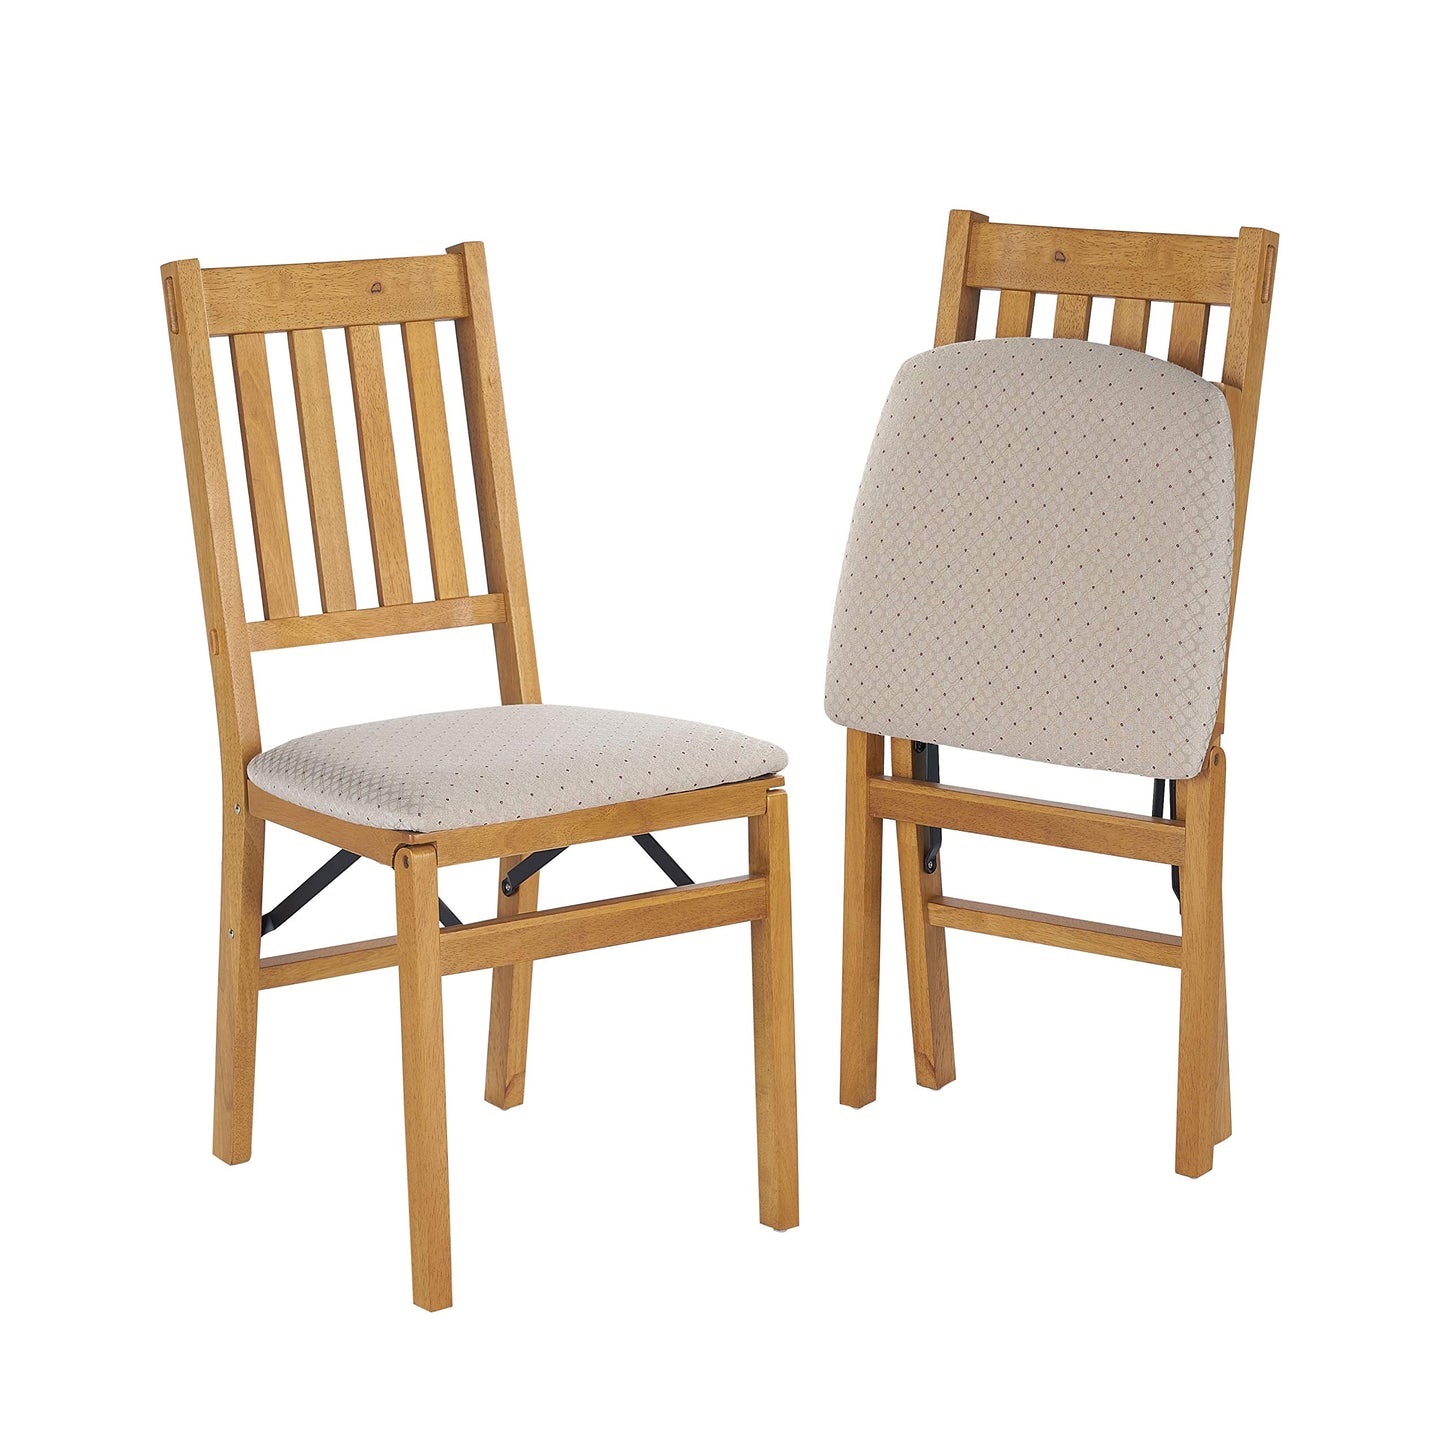 Meco STAKMORE Arts and Craft Folding Chair Oak Finish, Set of 2, Wood